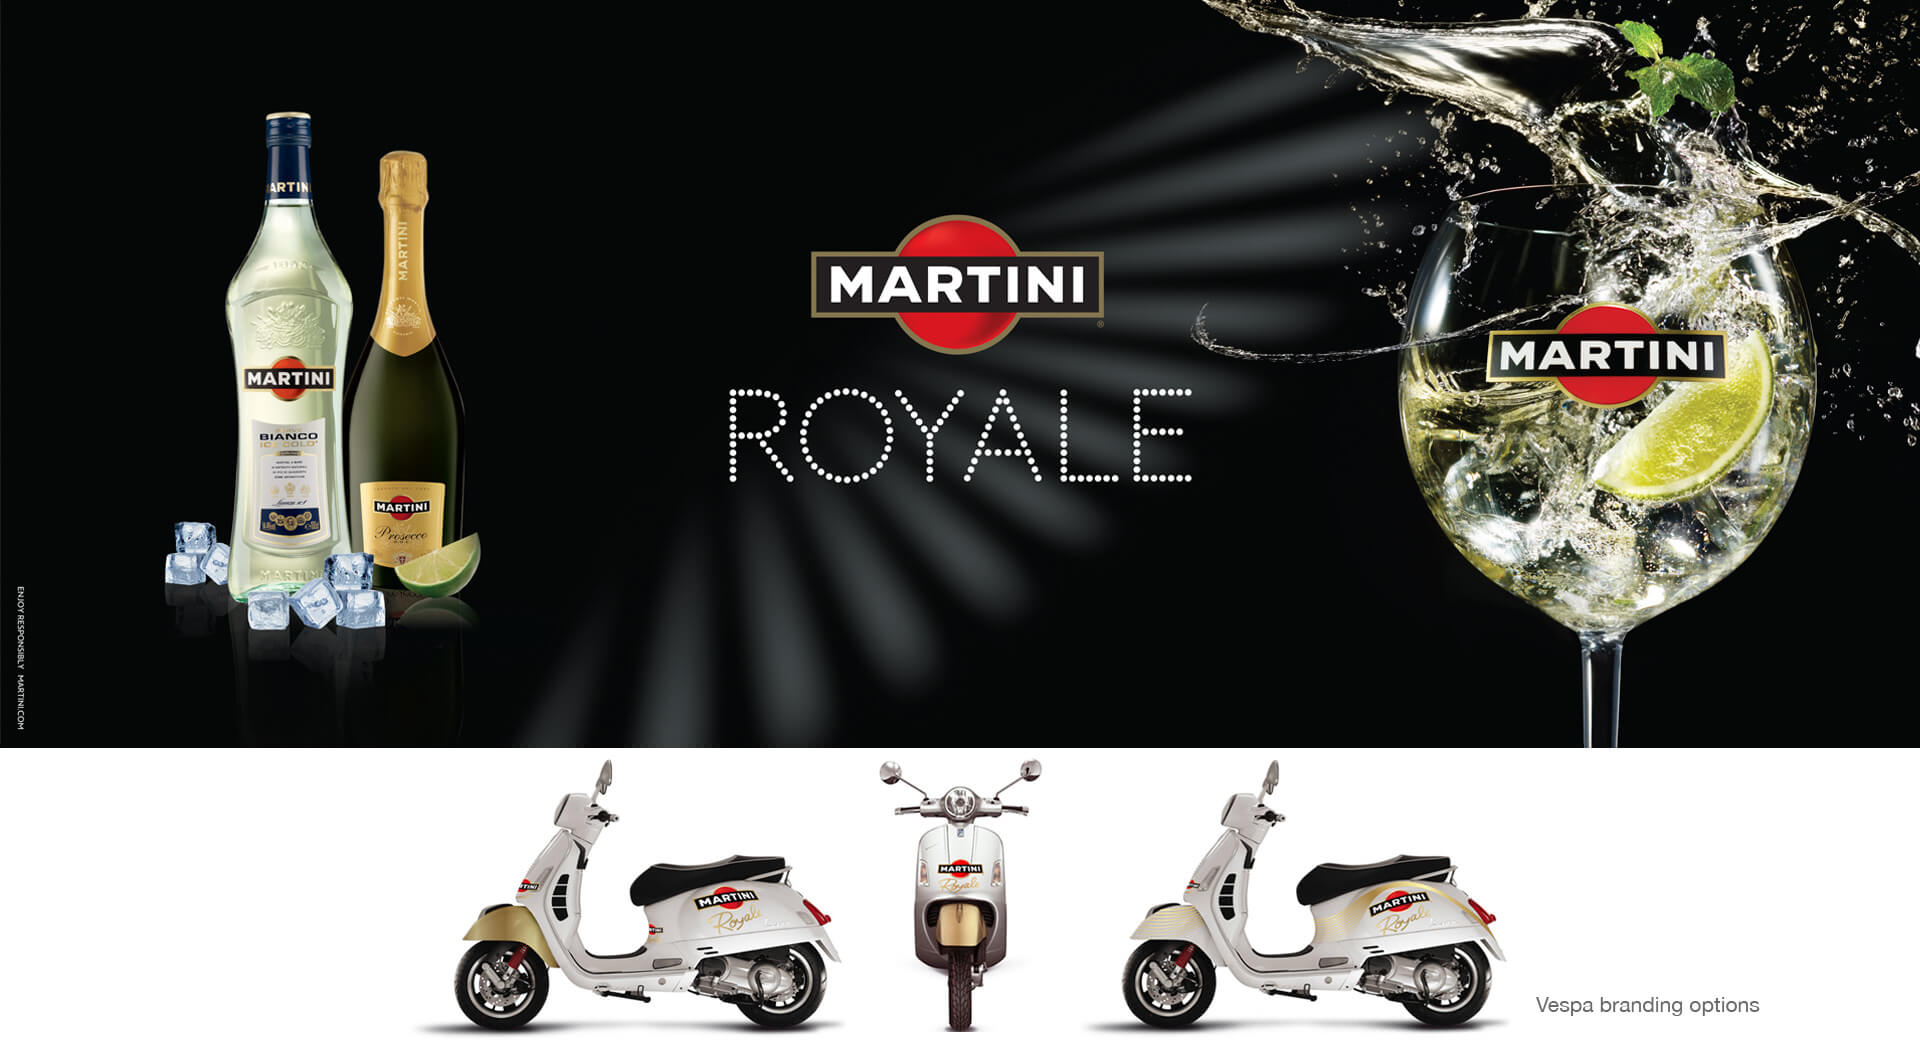  Martini Royale spirits industry promotion campaigns win a Vespa travel retail, airports, duty-free alcohol marketing for Bacardi Global Travel Retail